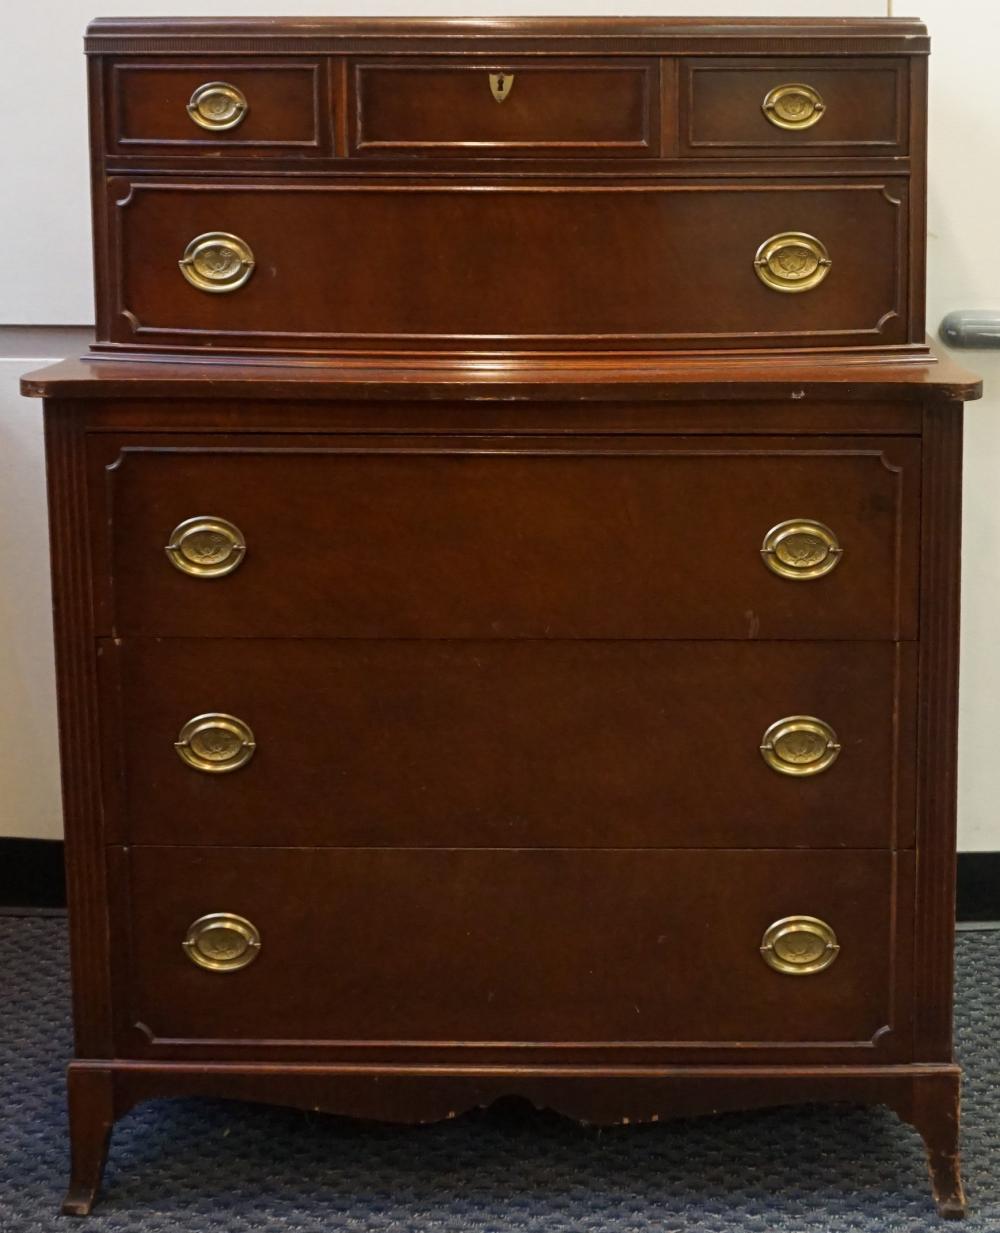 FEDERAL STYLE MAHOGANY CHEST OF 32a845